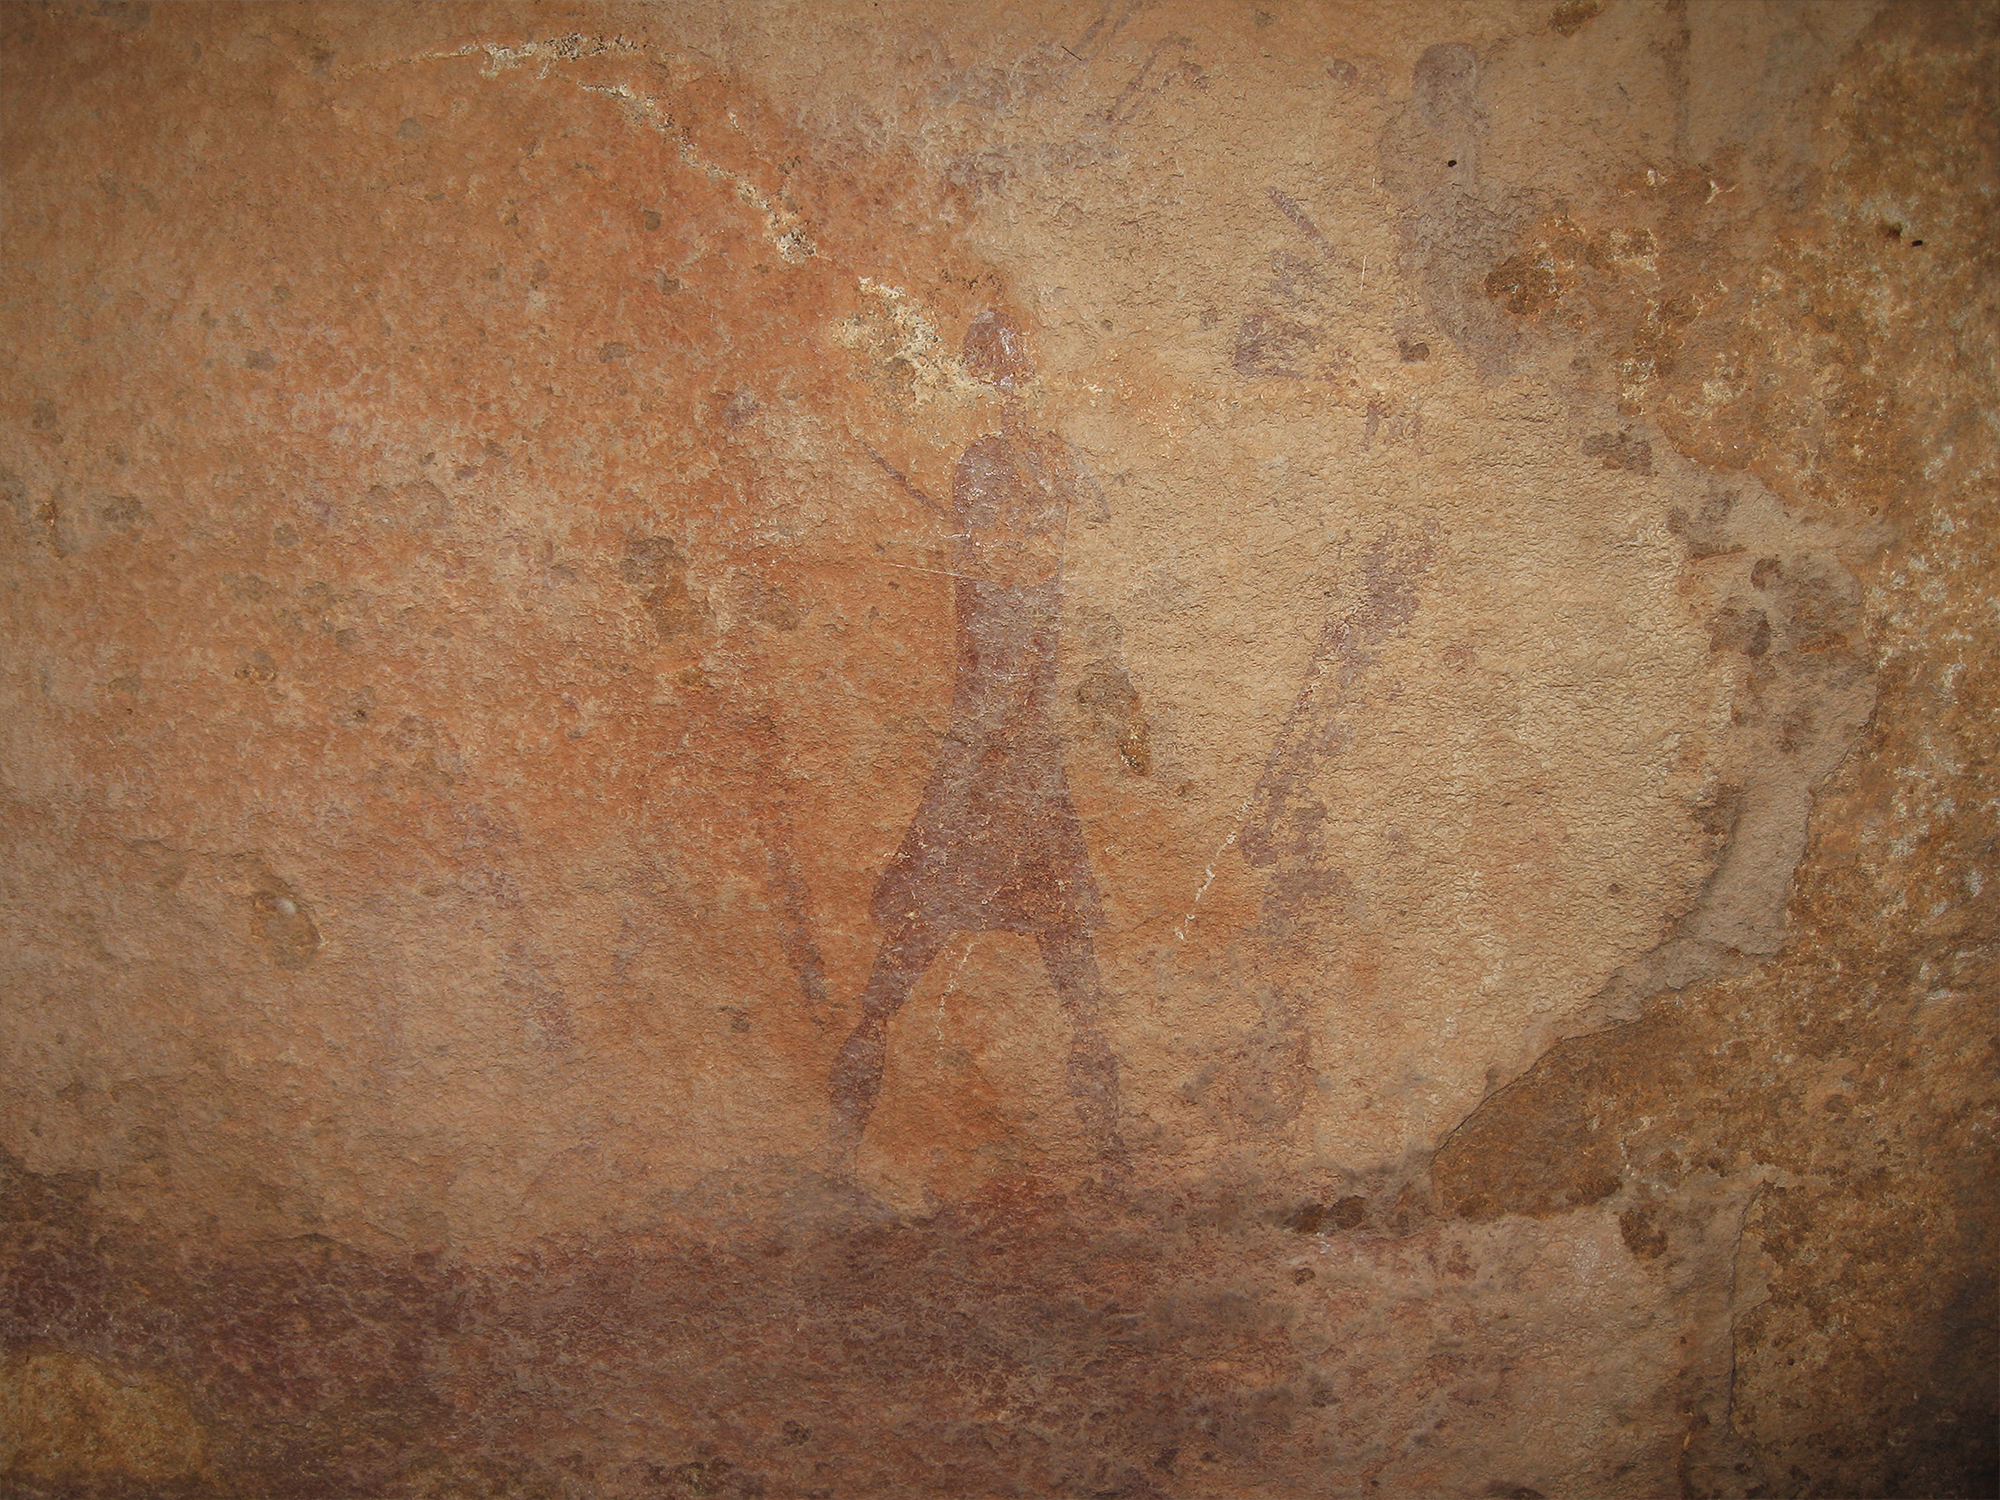 South African Rock Art South Africa